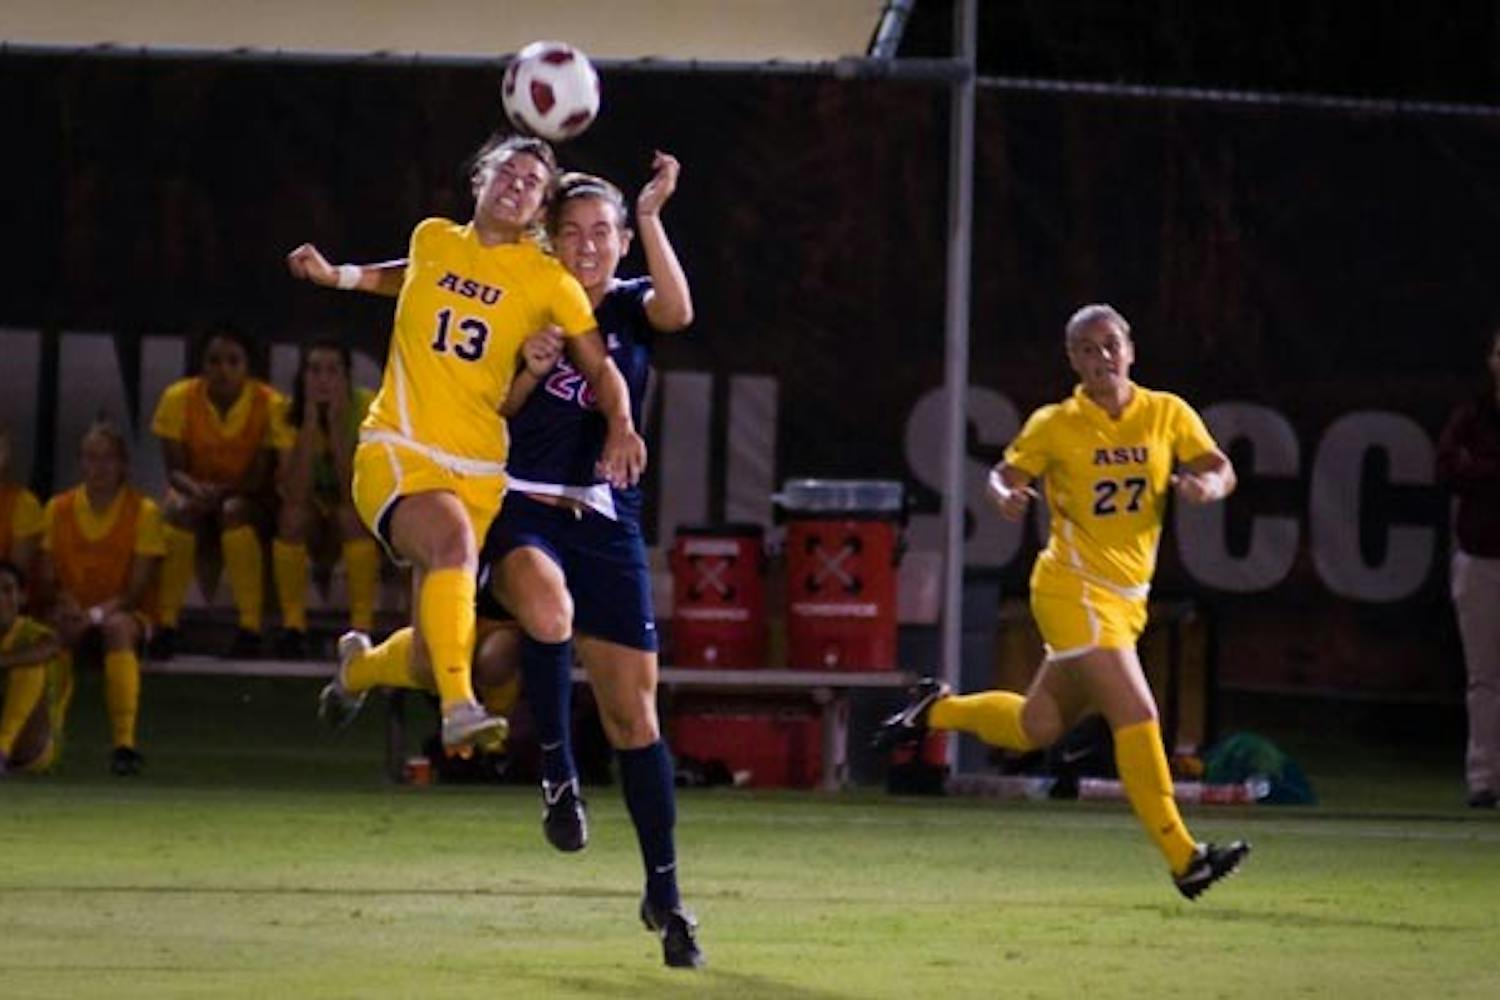 HEAD ON: Senior midfielder Alexandra Elston collides in mid air with a UA defender during ASU's 2-1 win Saturday. Elston scored both of ASU's goals en route to the rivalry win, notching the fourth two-game goal of her career. (Photo by Aaron Lavinsky)